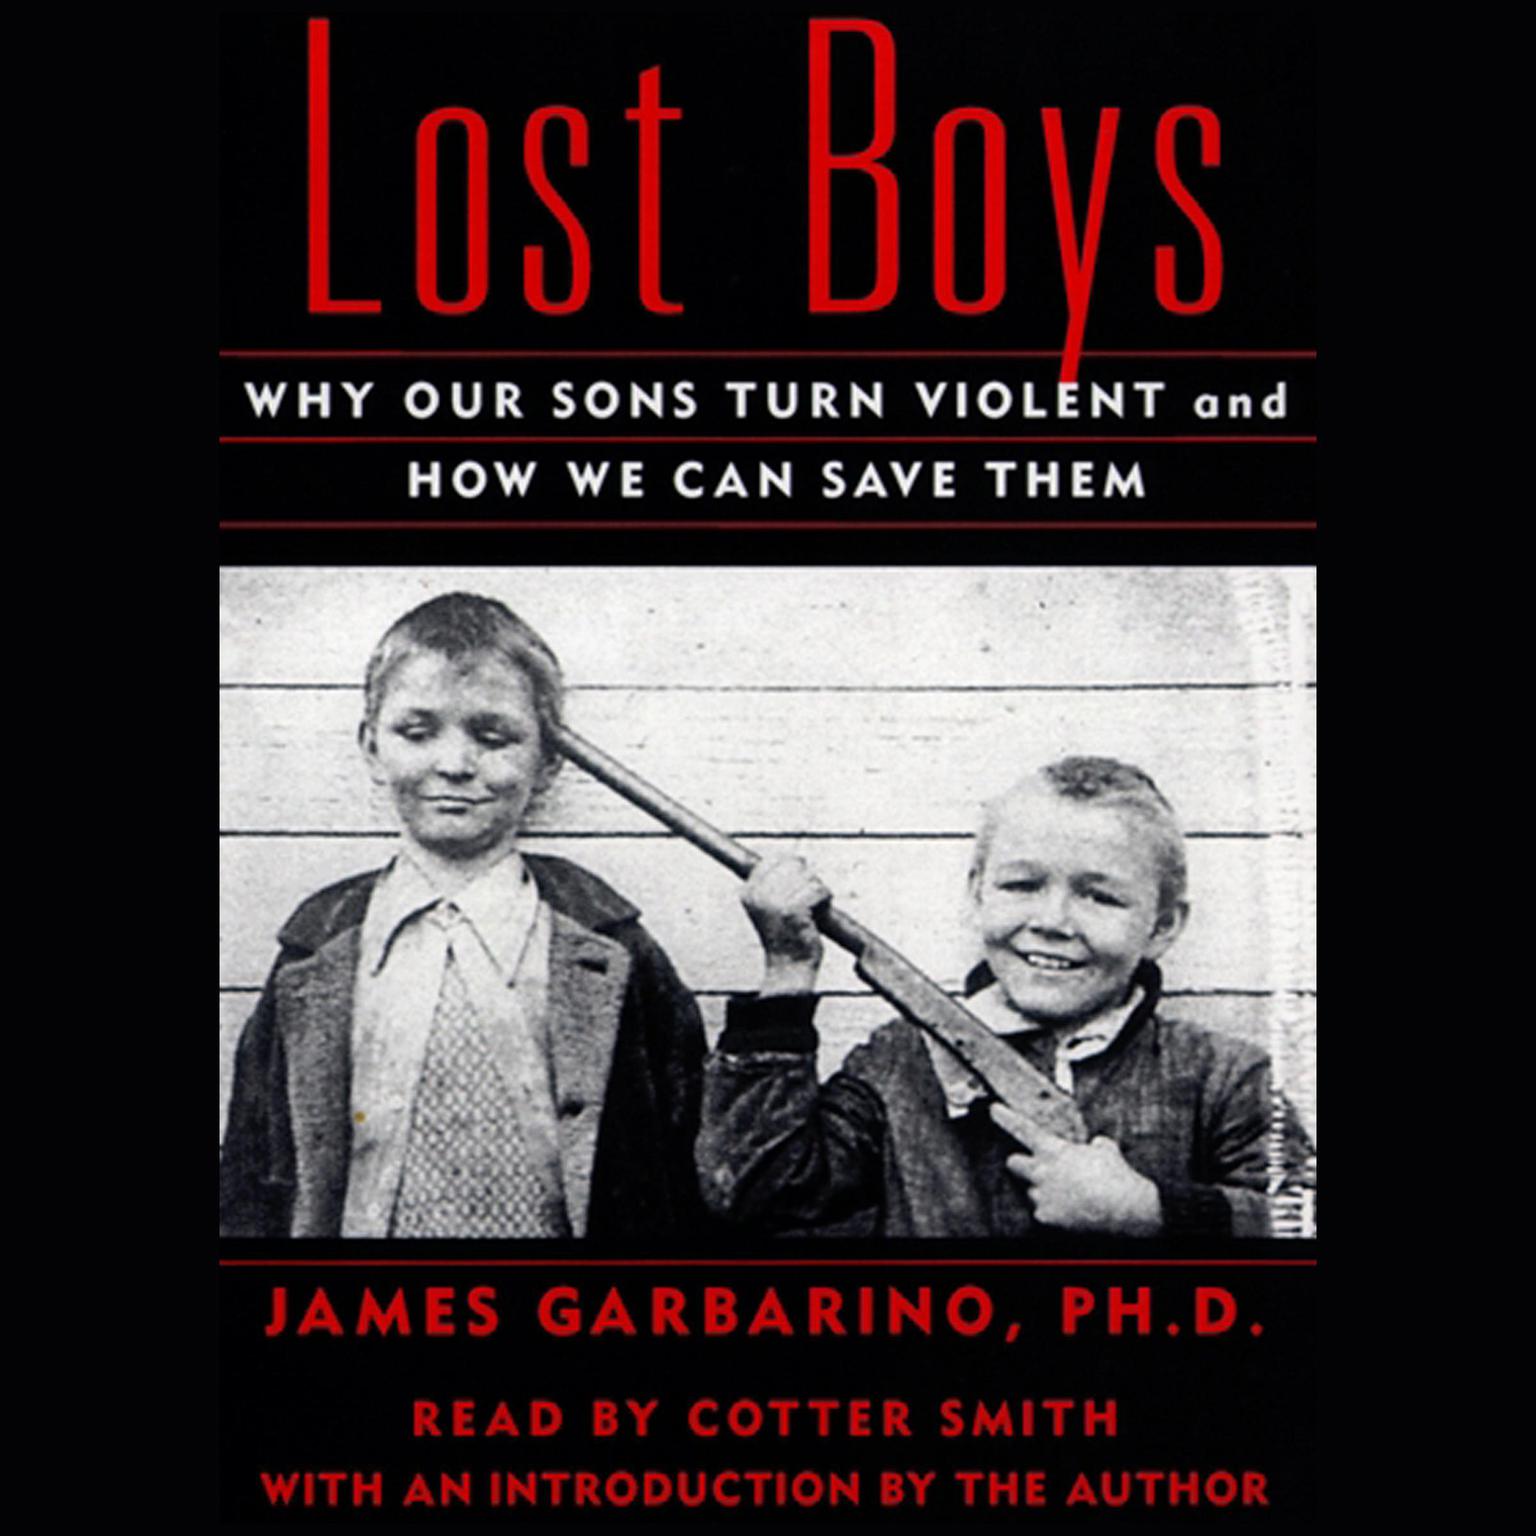 Lost Boys (Abridged): Why Our Sons Turn Violent and How We Can Save Them Audiobook, by James Garbarino